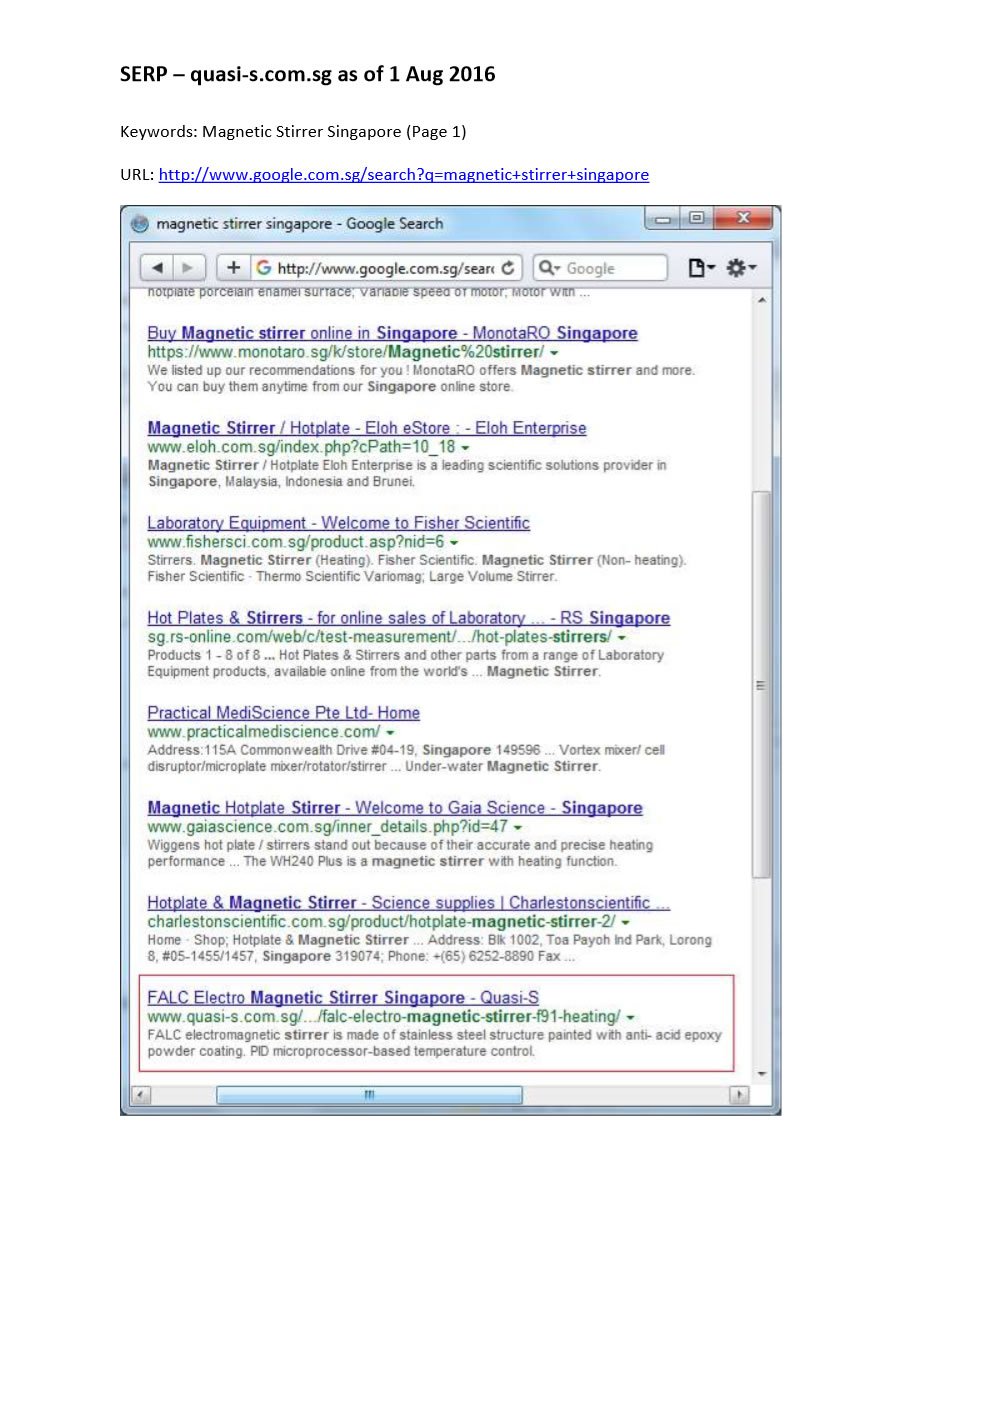 Google Ranking on Page 1